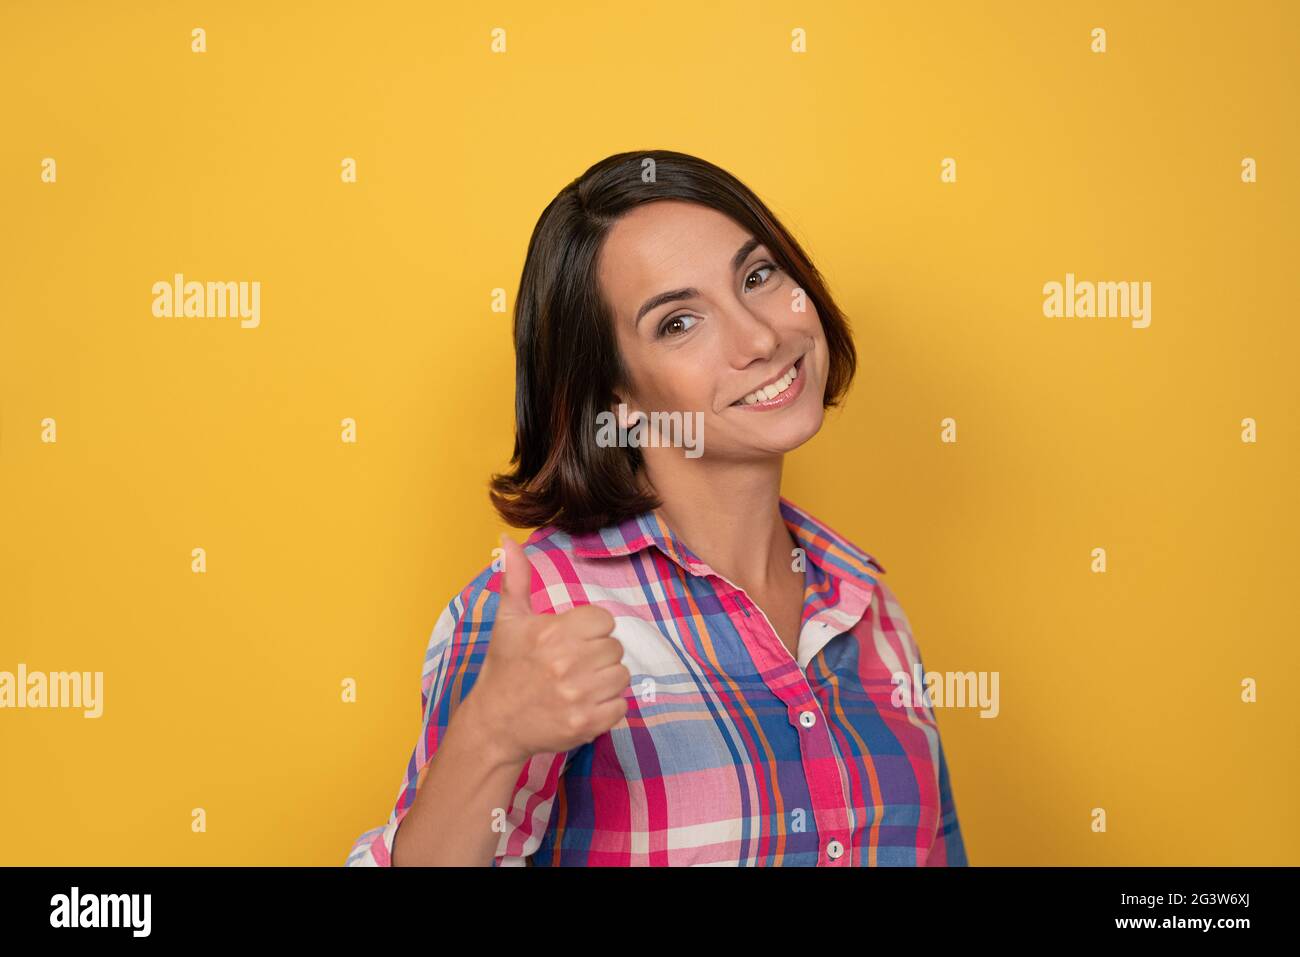 Raising thumb up gesture with hand smile beautiful woman dressed in a plaid shirt and dark hair on yellow background. Human emot Stock Photo